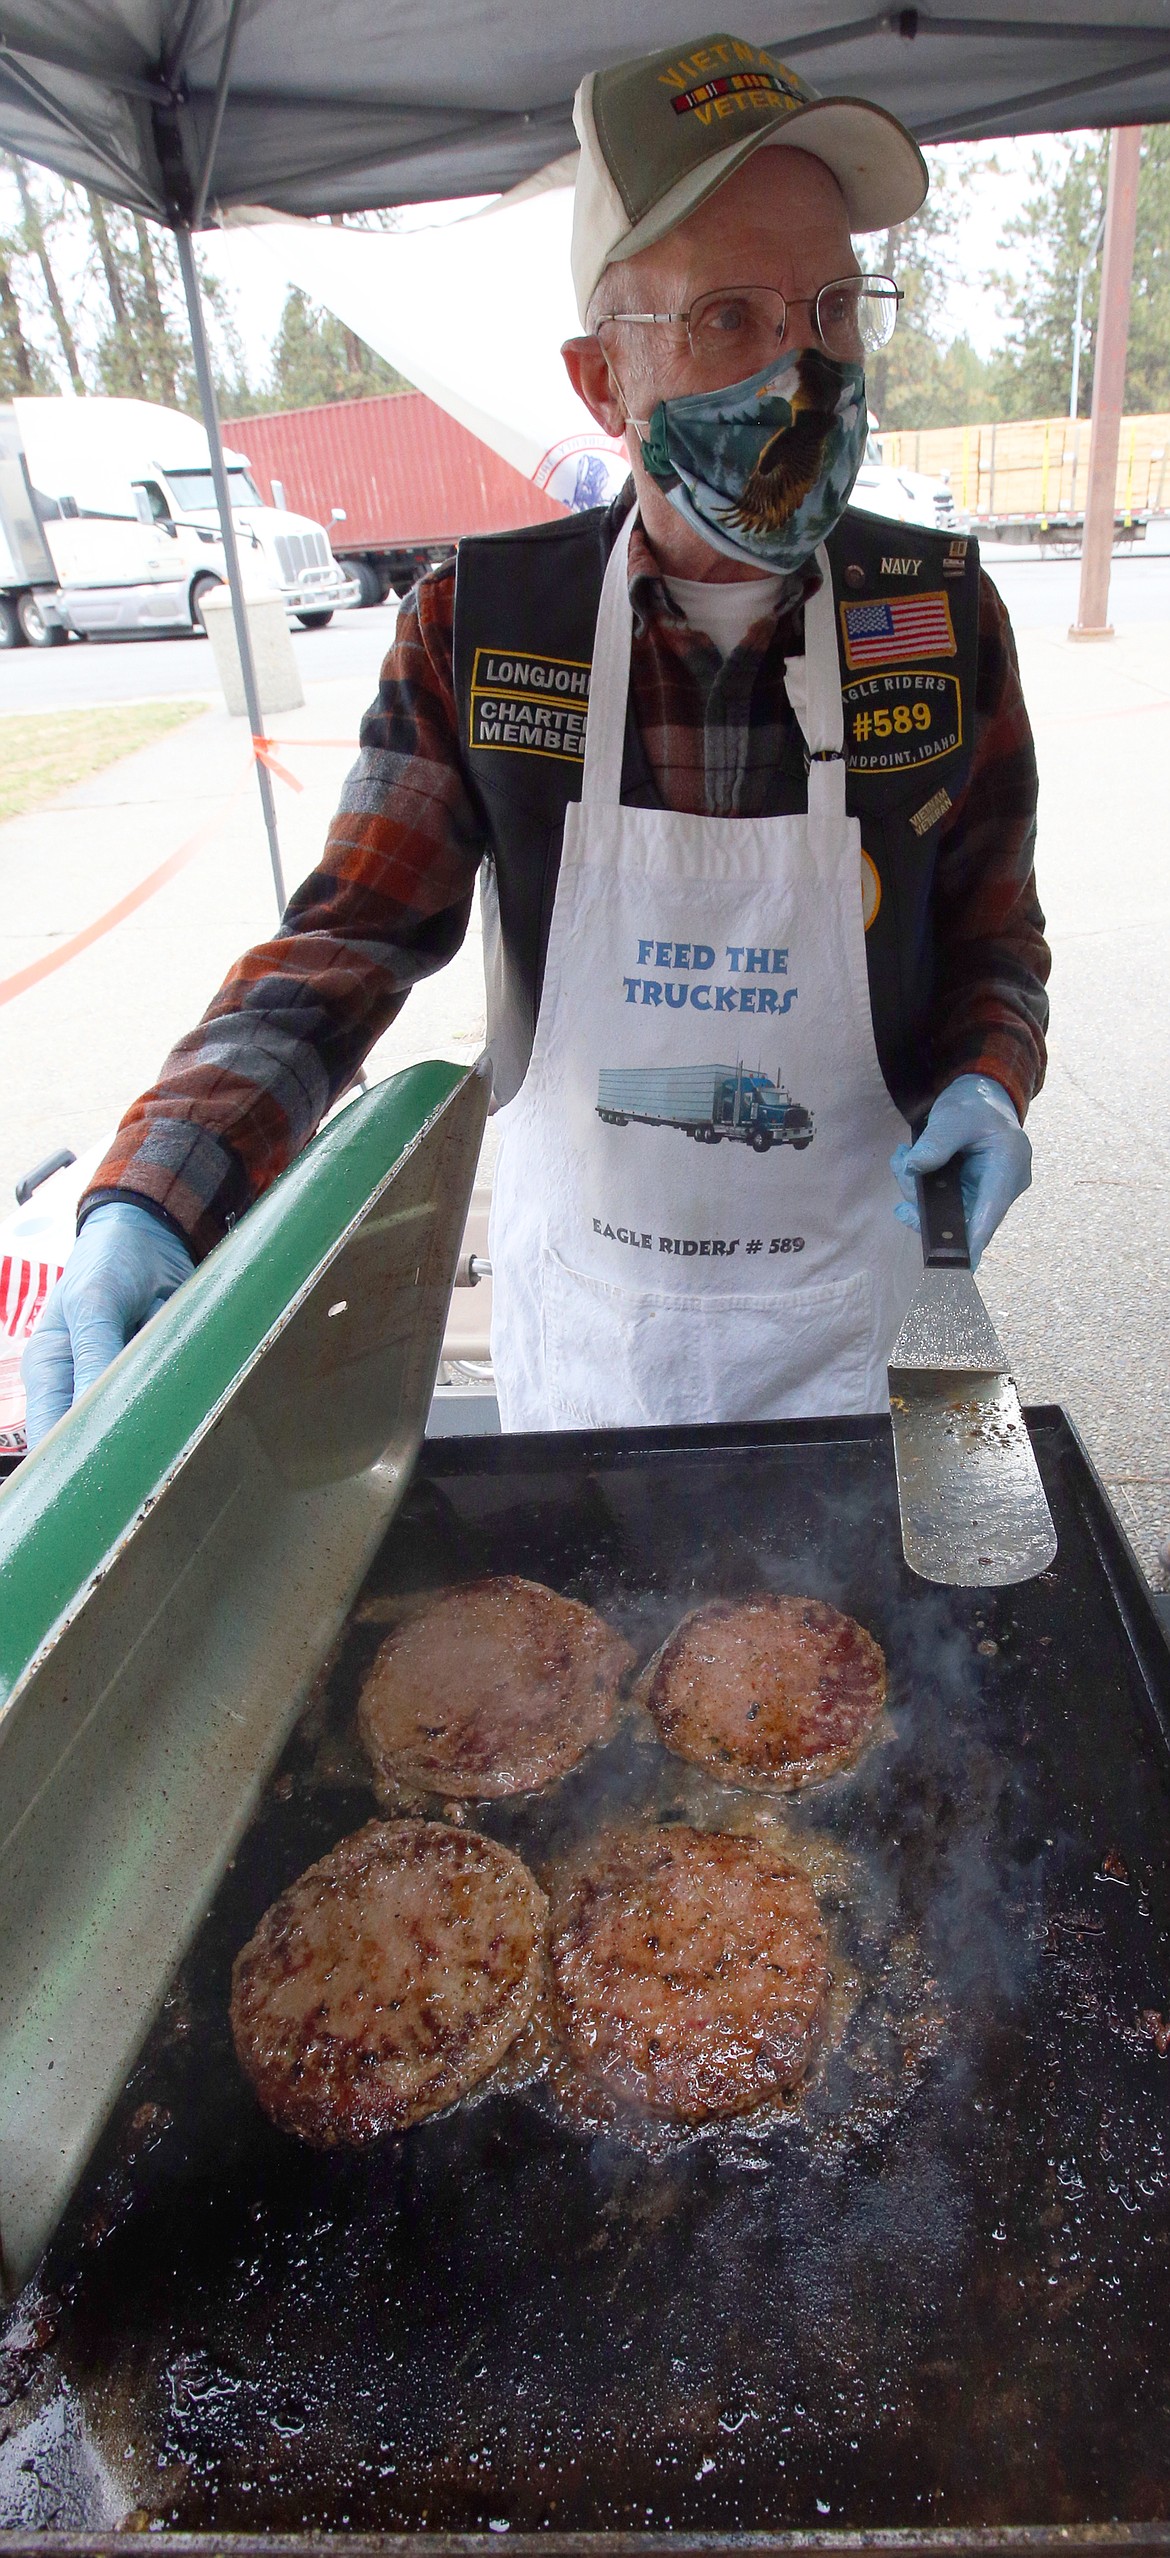 John Loomer Sr. with the Eagle Riders cooks up burgers for truckers at the Huetter rest stop.